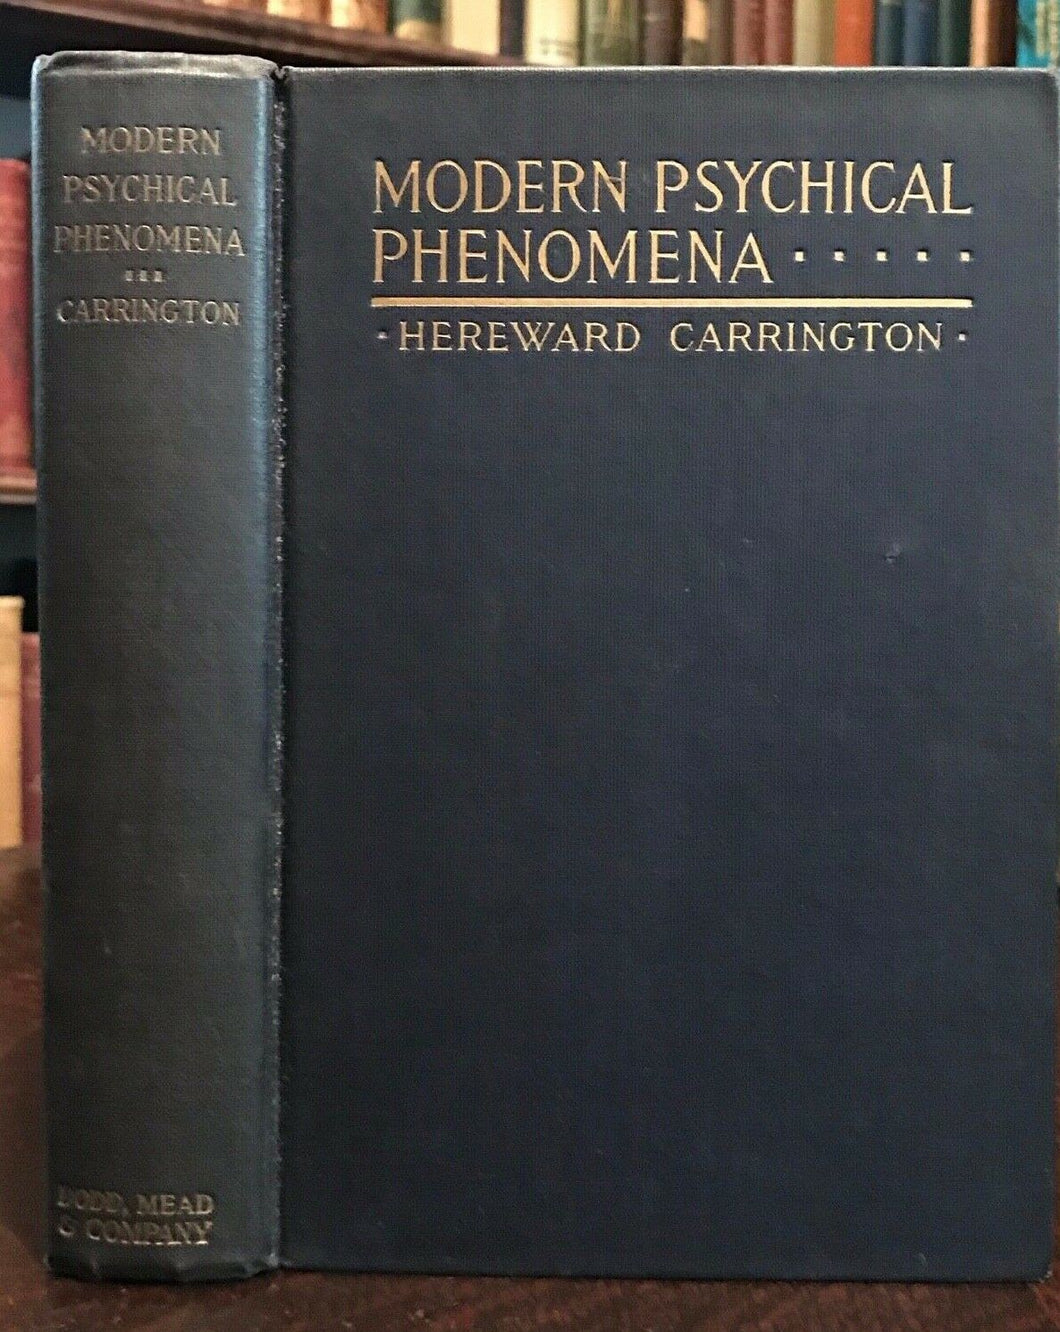 MODERN PSYCHICAL PHENOMENA - Carrington, 1st Ed 1919 - OCCULT DIVINATION GHOSTS